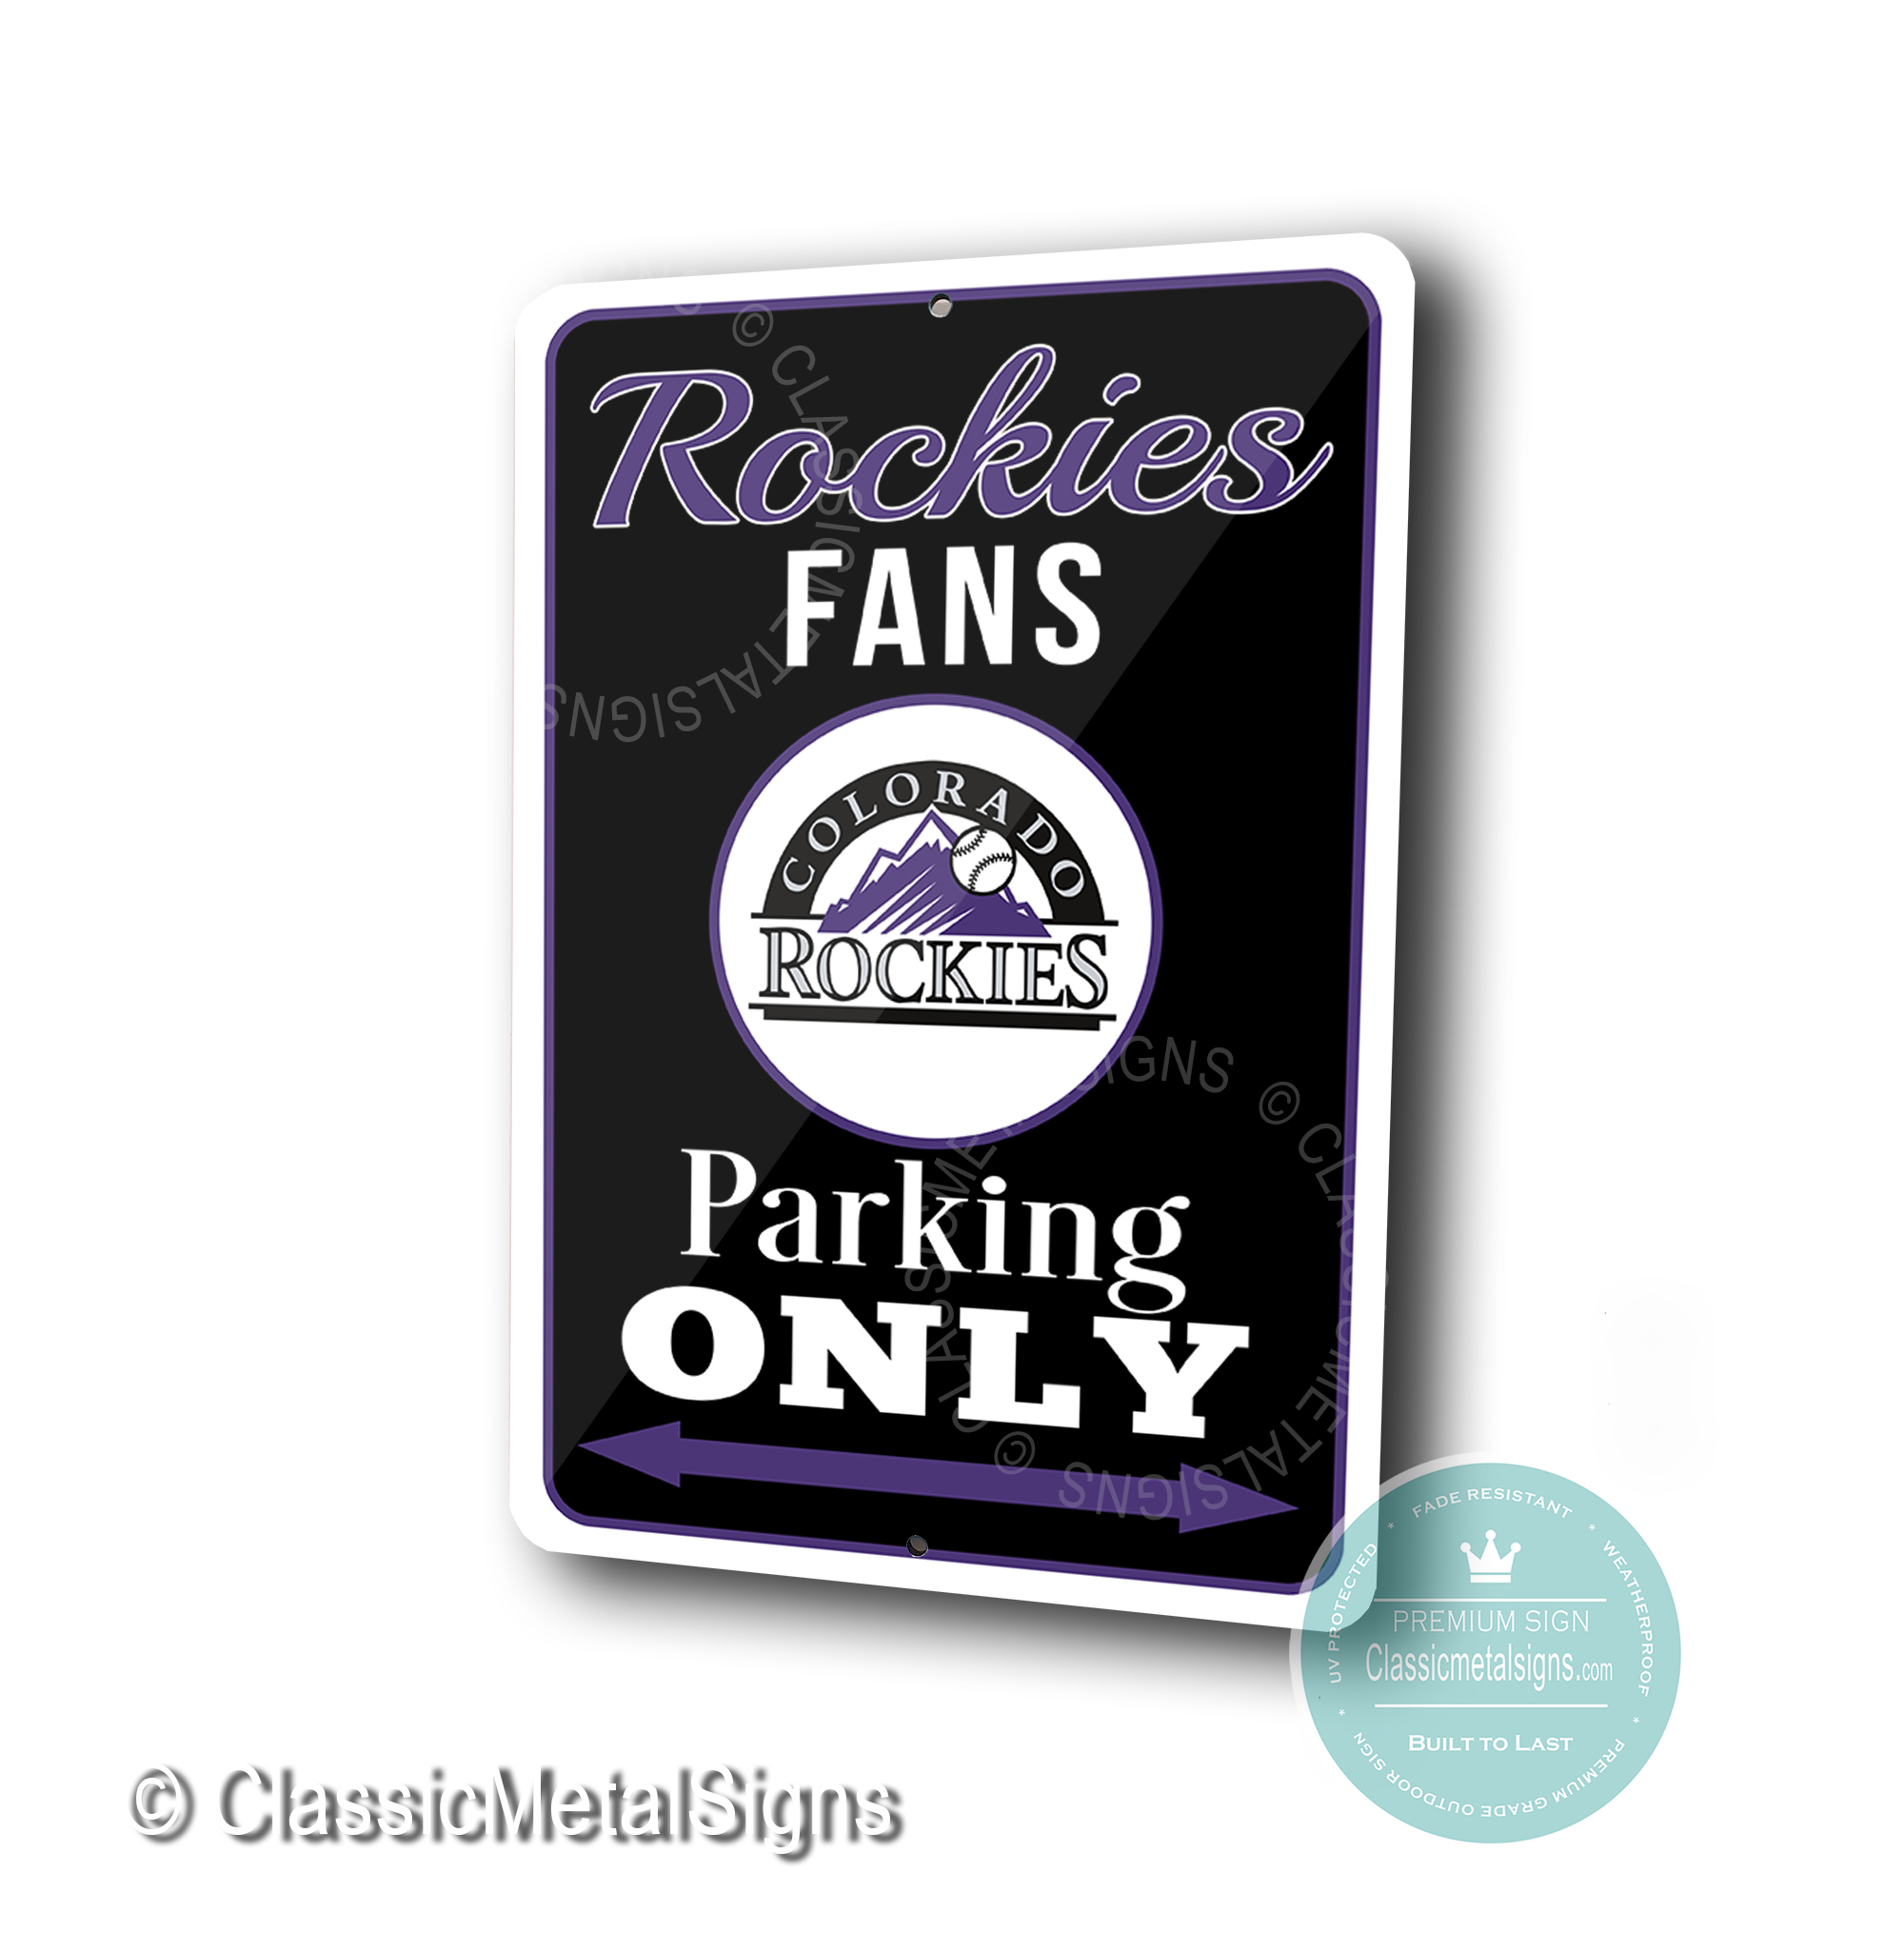 Colorado Rockies Parking Only signs